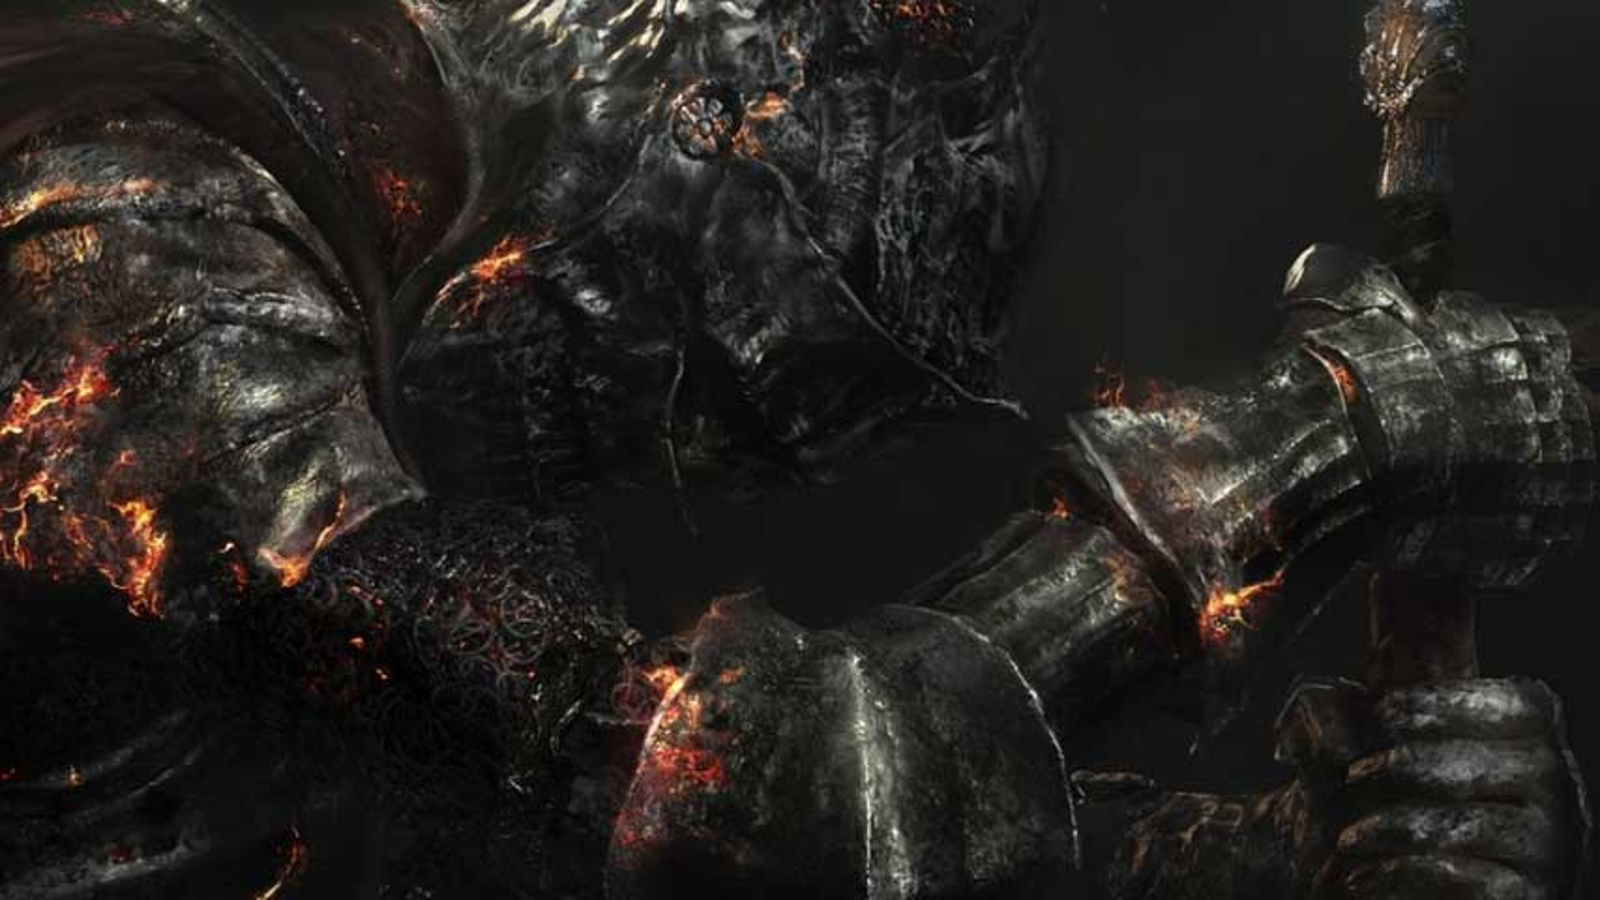 10 Most Powerful Dark Souls Weapons